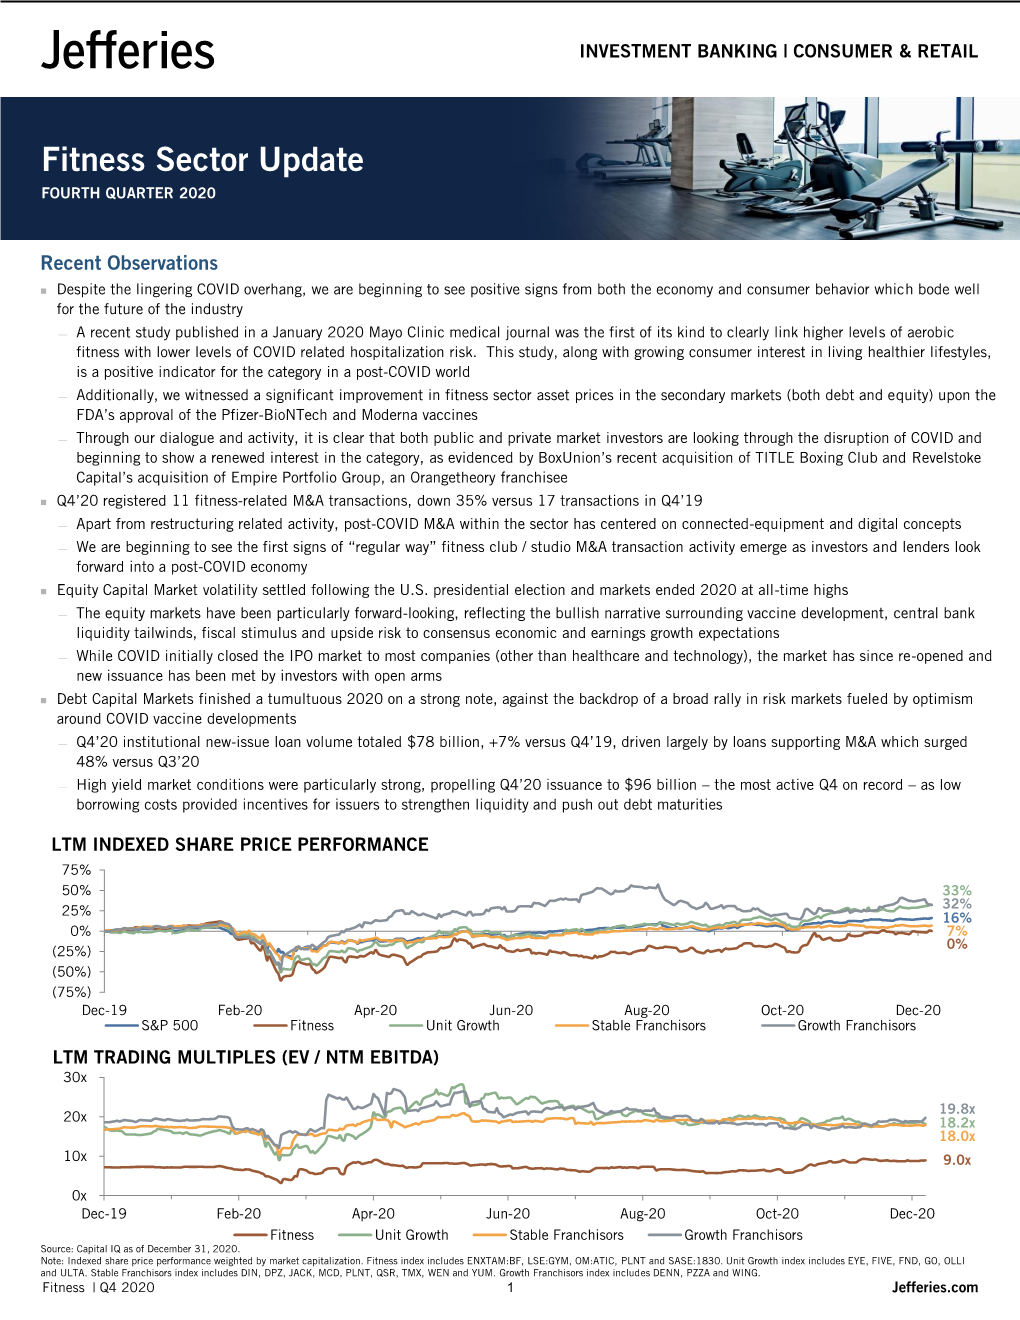 Fitness Sector Update FOURTH QUARTER 2020